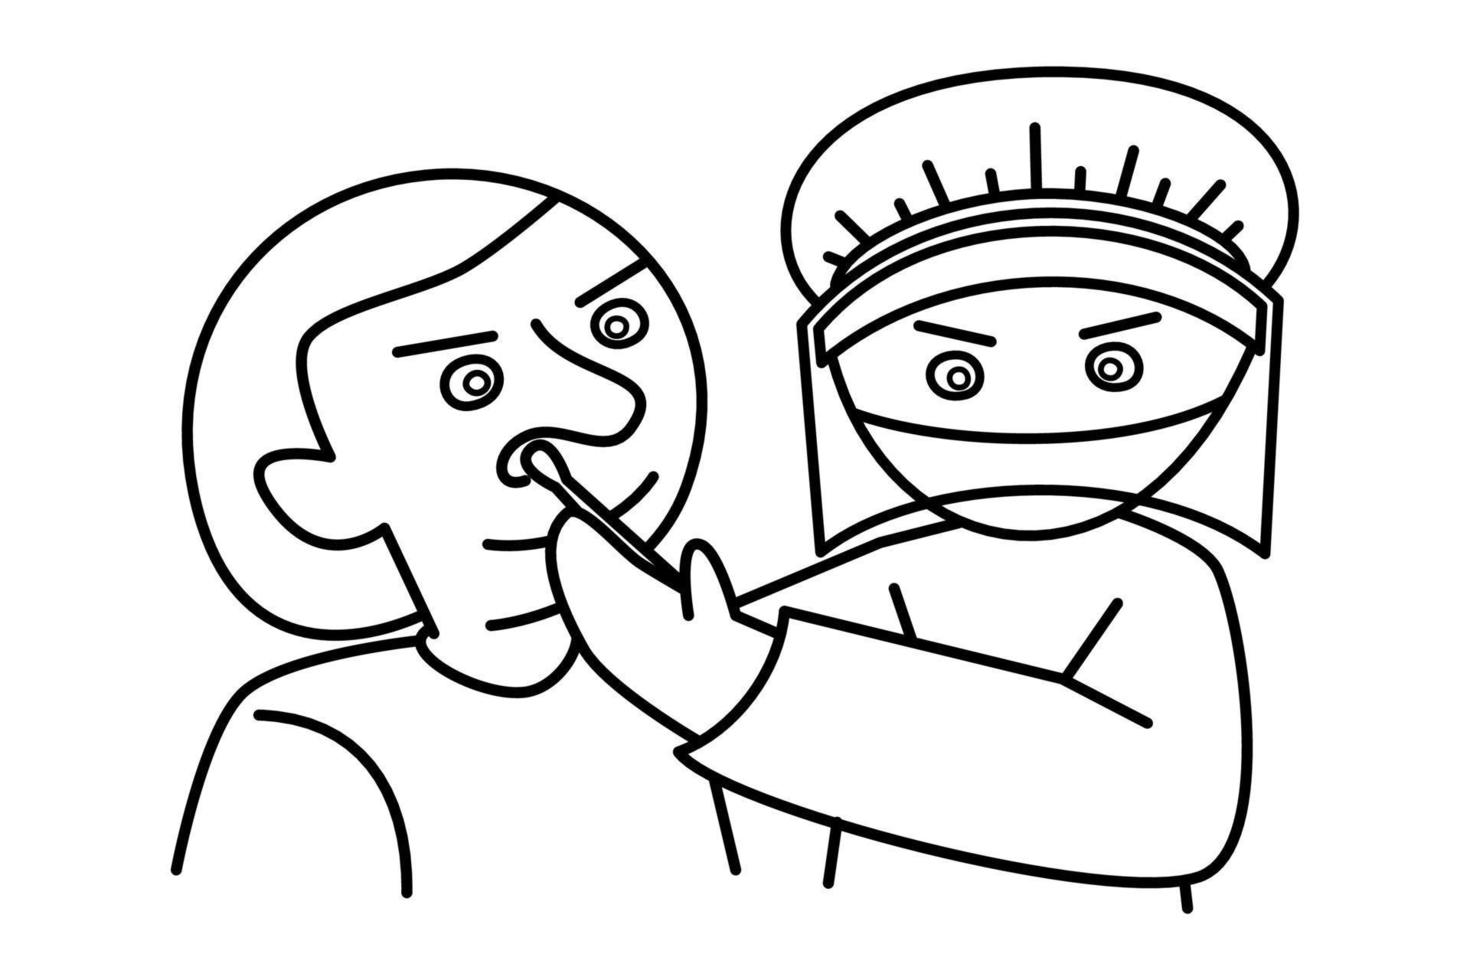 Character line drawing medical personnel wear masks and examination equipment vector